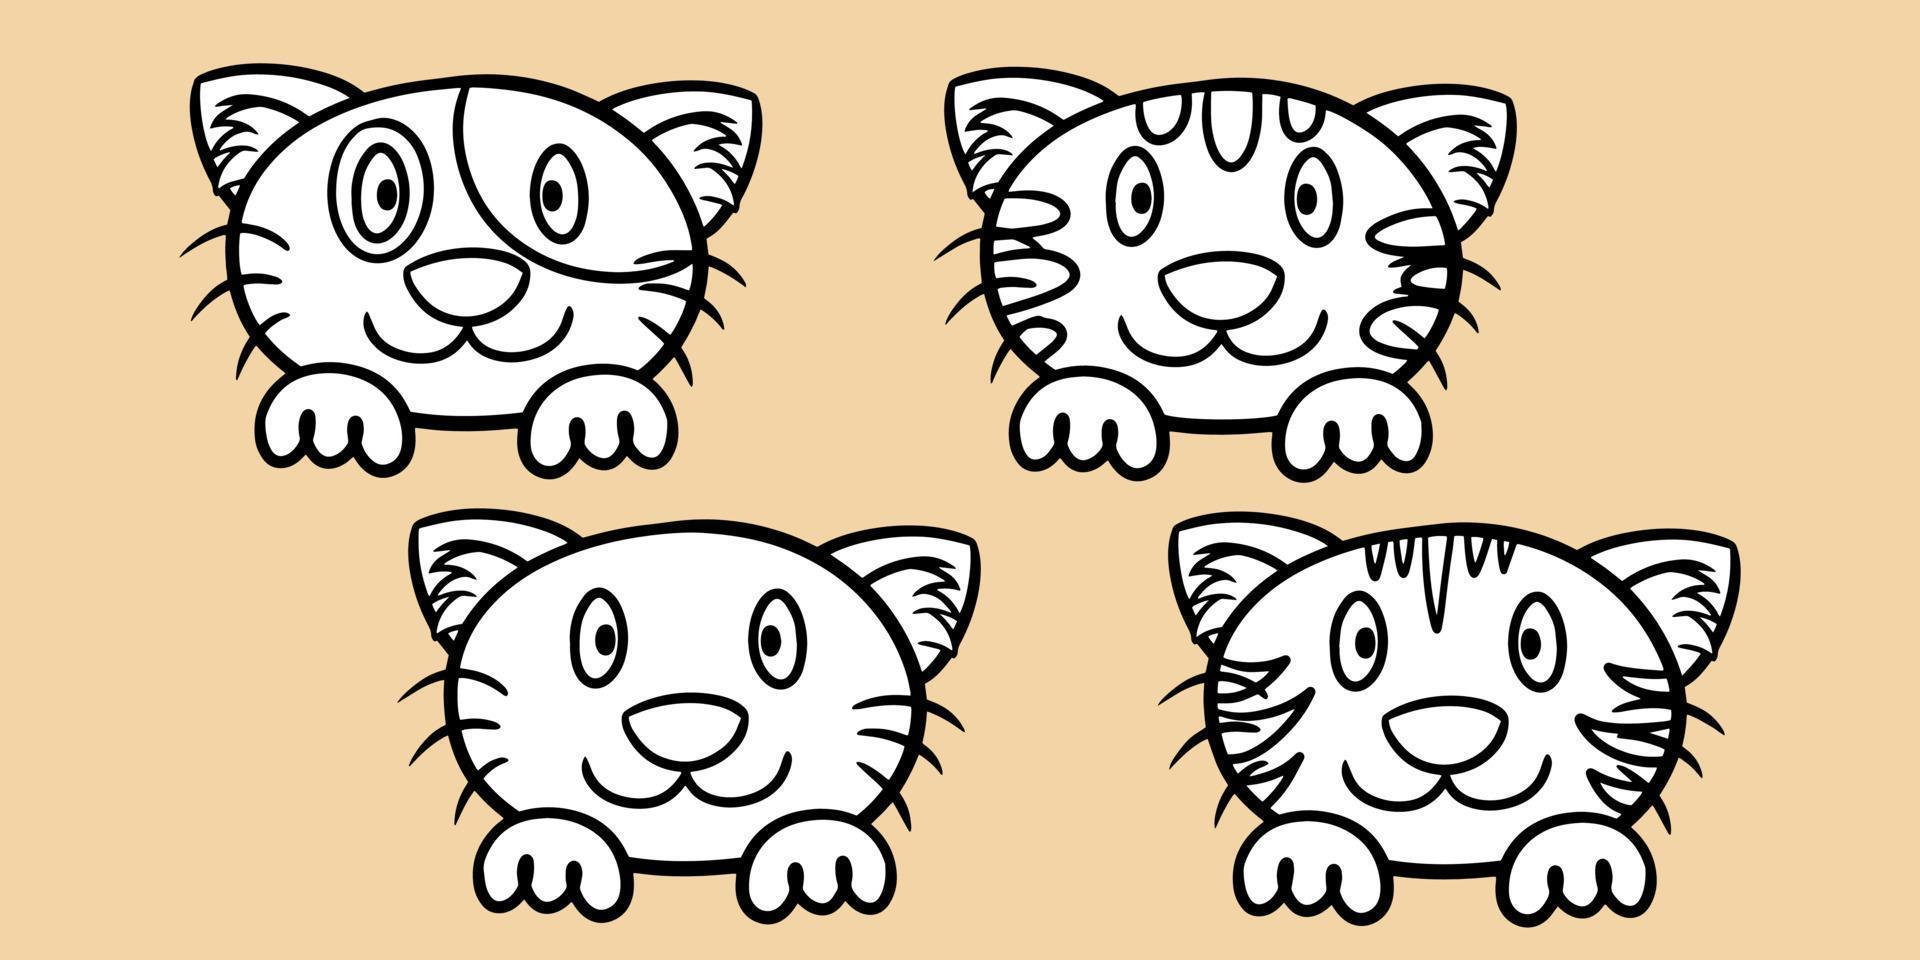 A set of cartoon black-and-white monochrome cute cats with paws, cat faces with different emotions, vector illustration on a light background